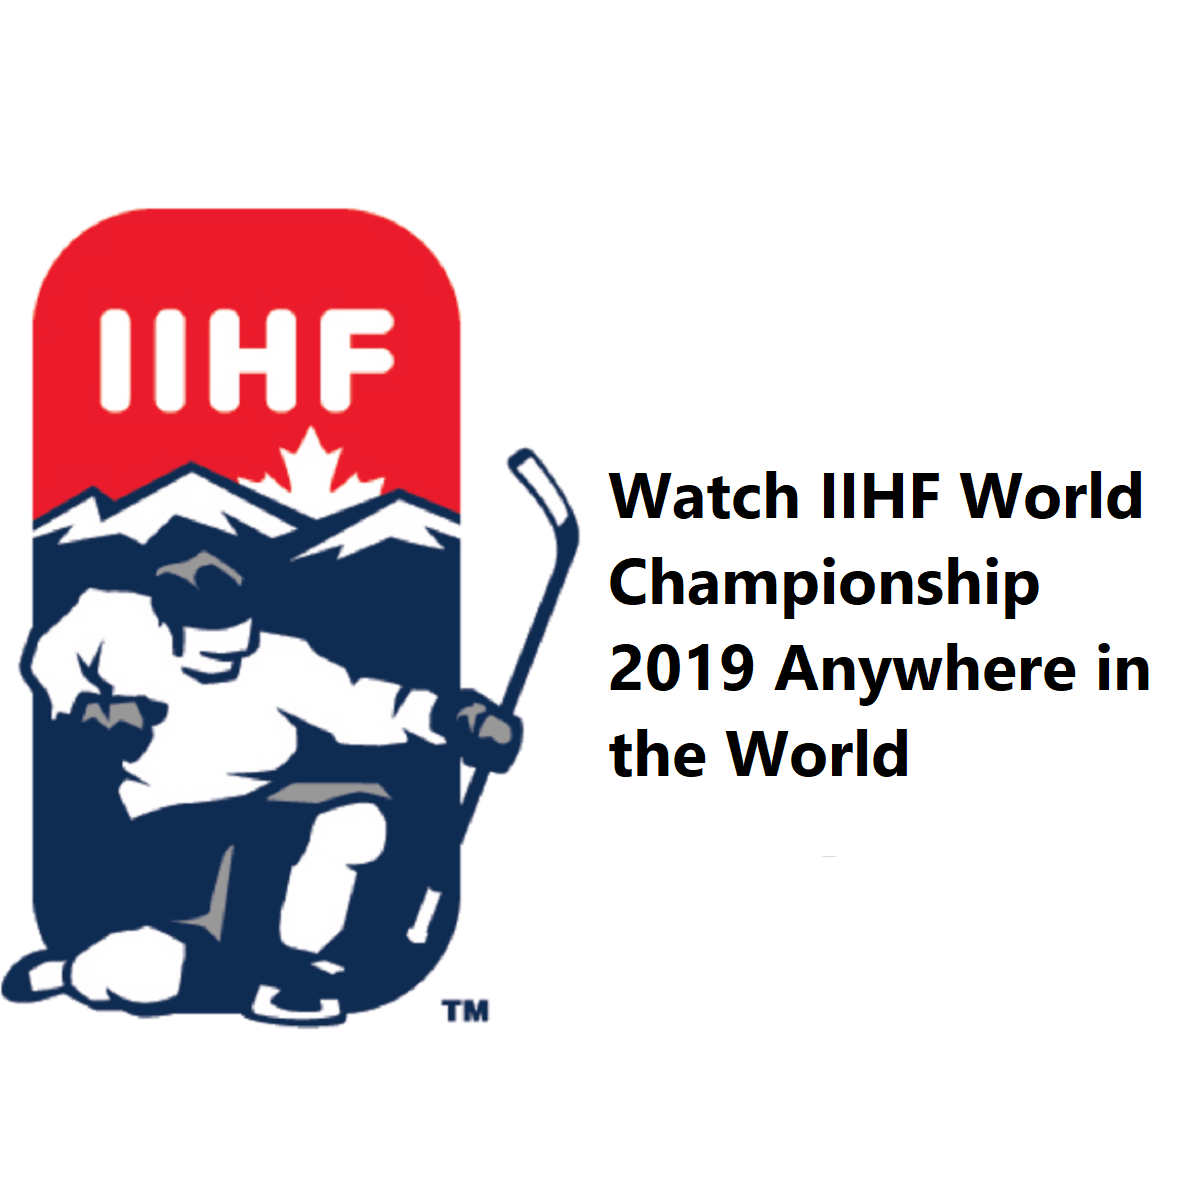 Unblock and Watch IIHF World Championship Anywhere with a VPN